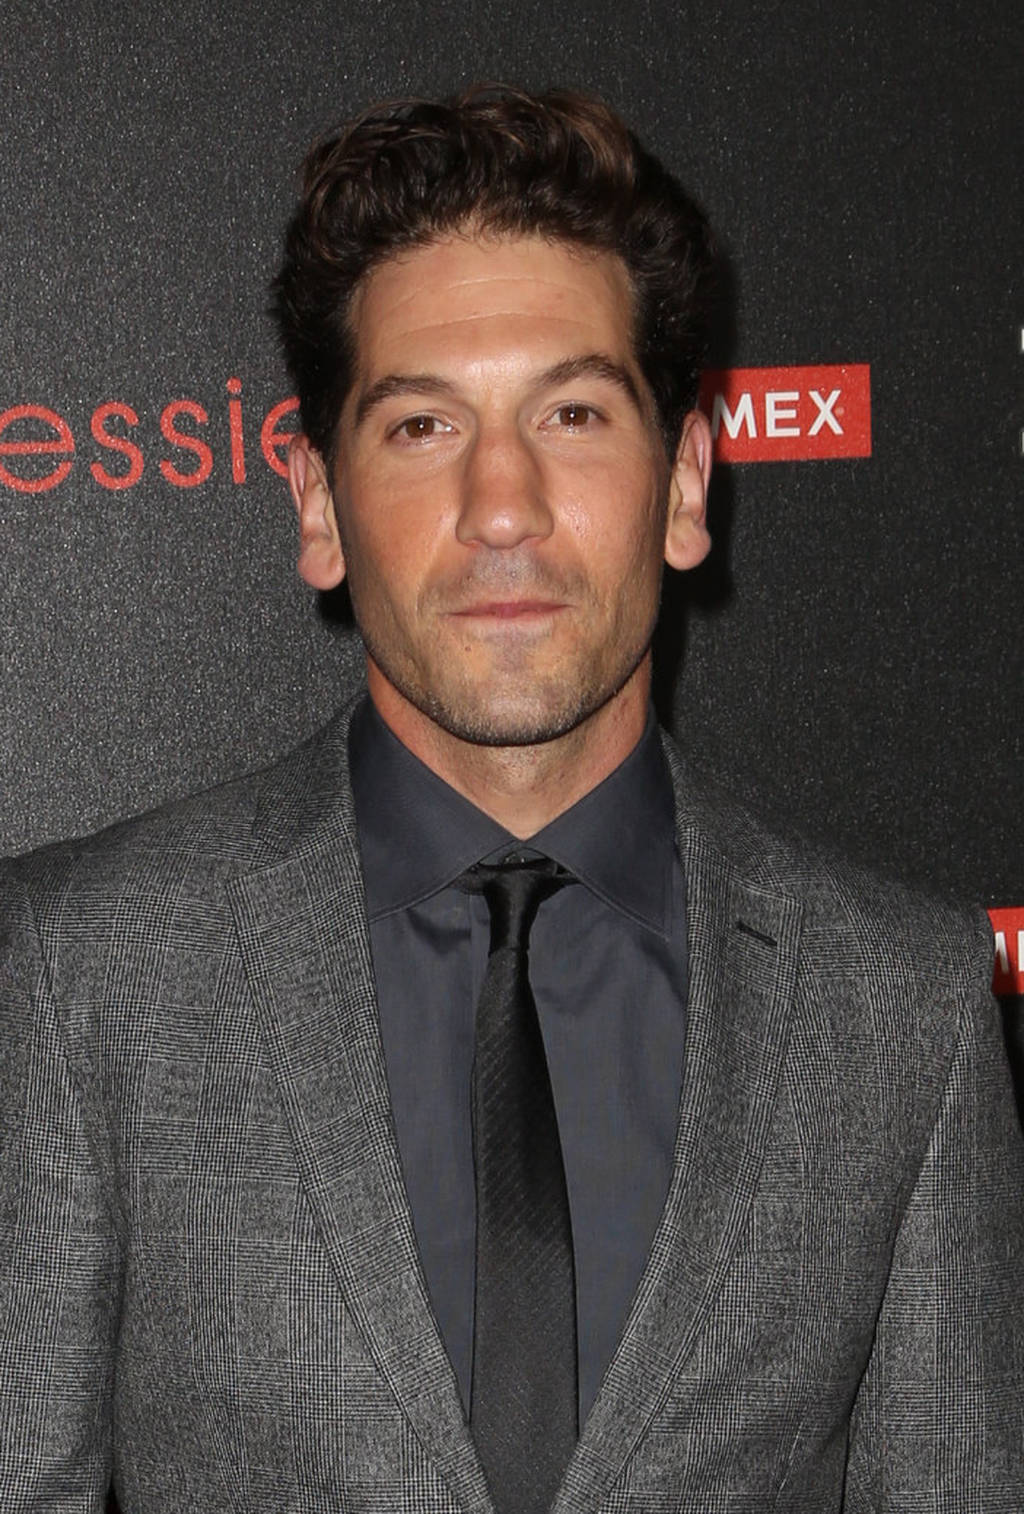 Pictures of Jon Bernthal - Pictures Of Celebrities1024 x 1514